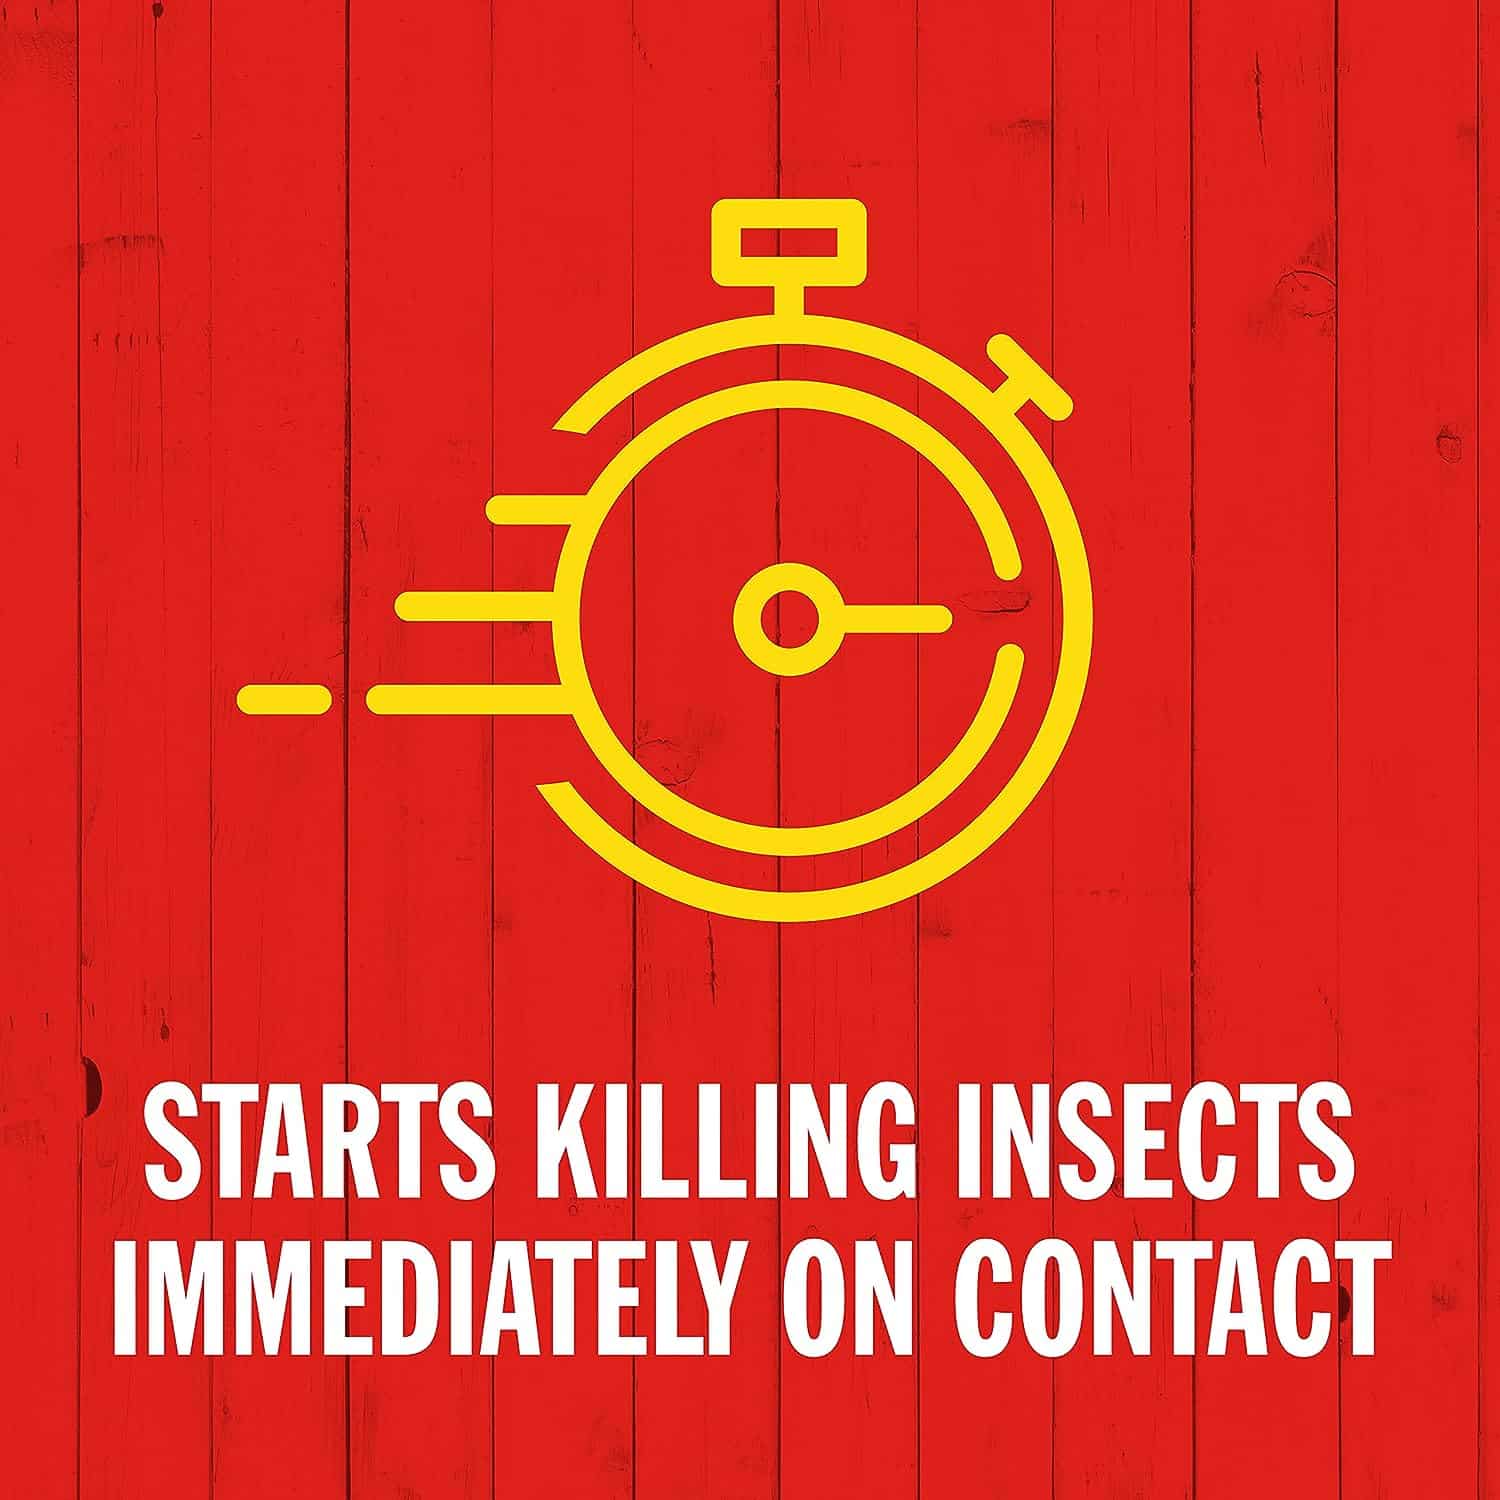 Sevin Insect Killer Dust: The Ultimate Solution for Insect Control